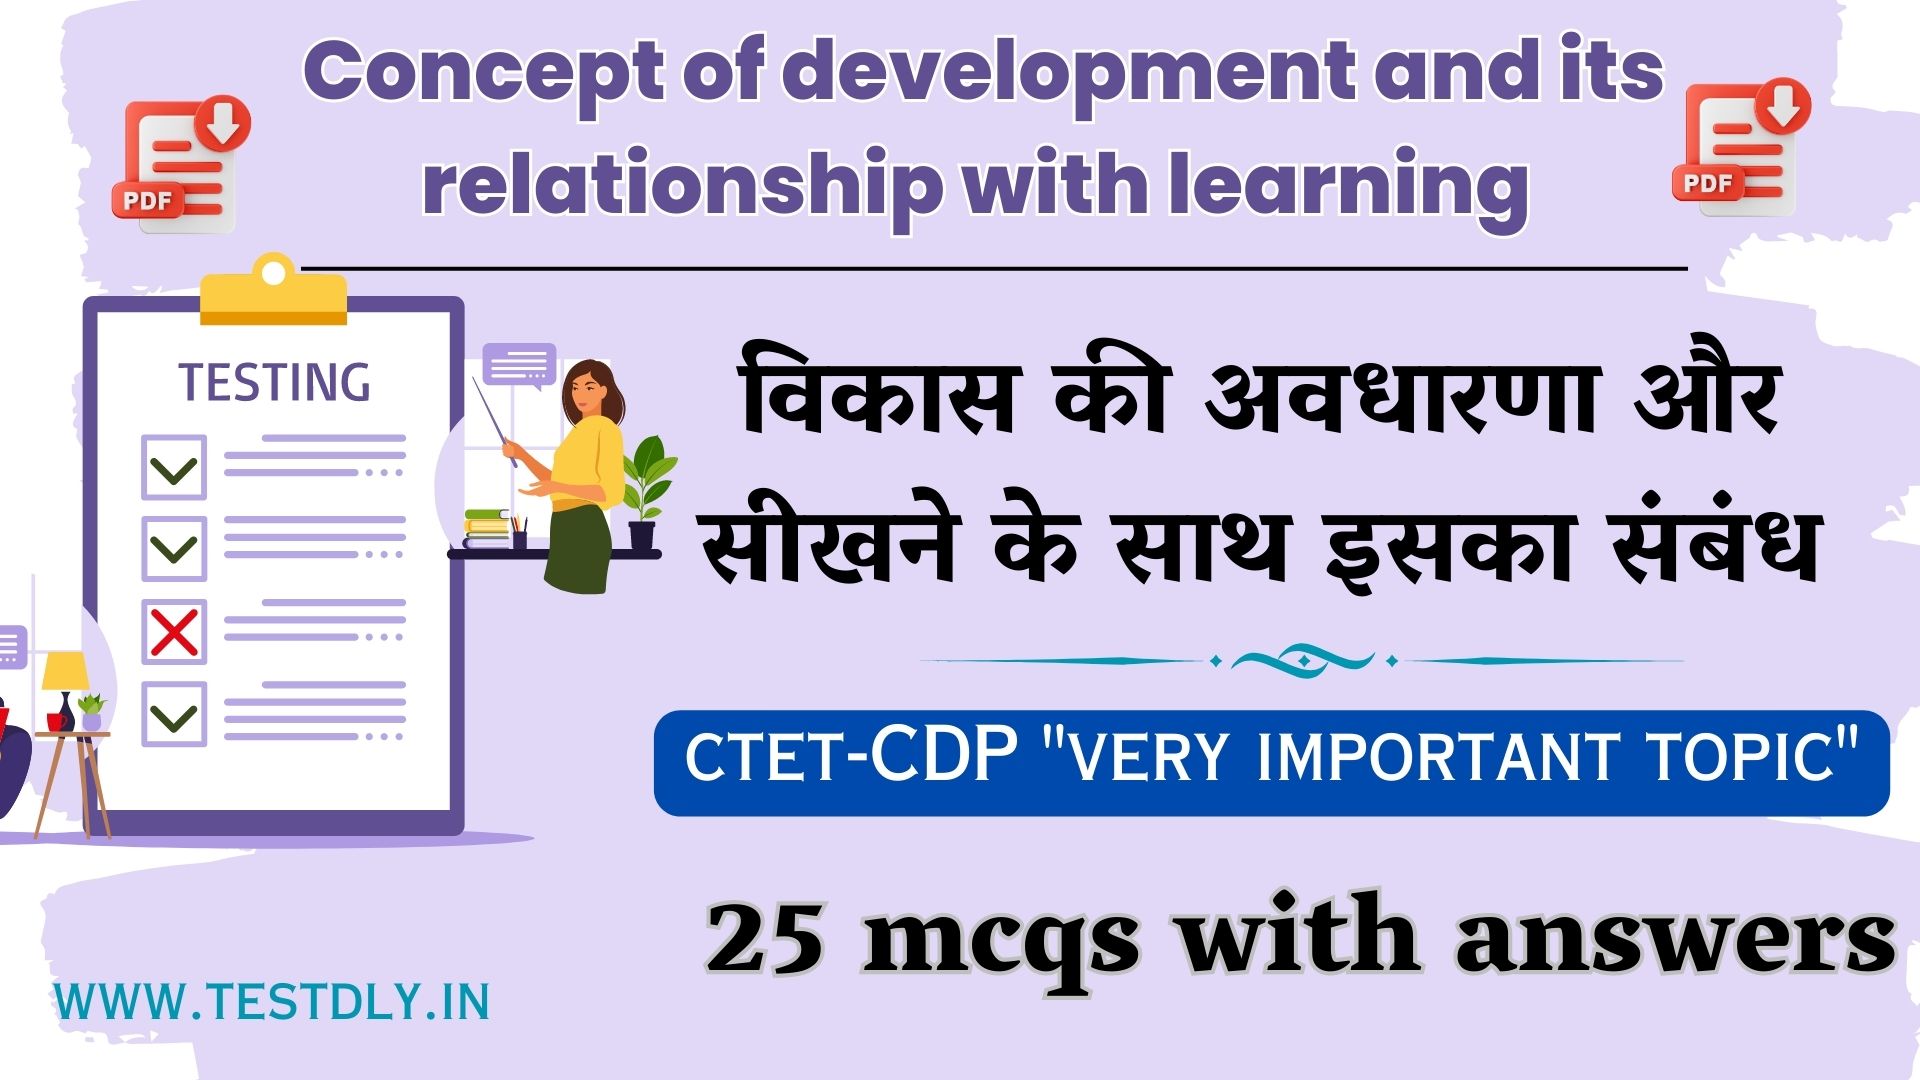 25 mcqs with answers on Concept of development and its relationship with learning